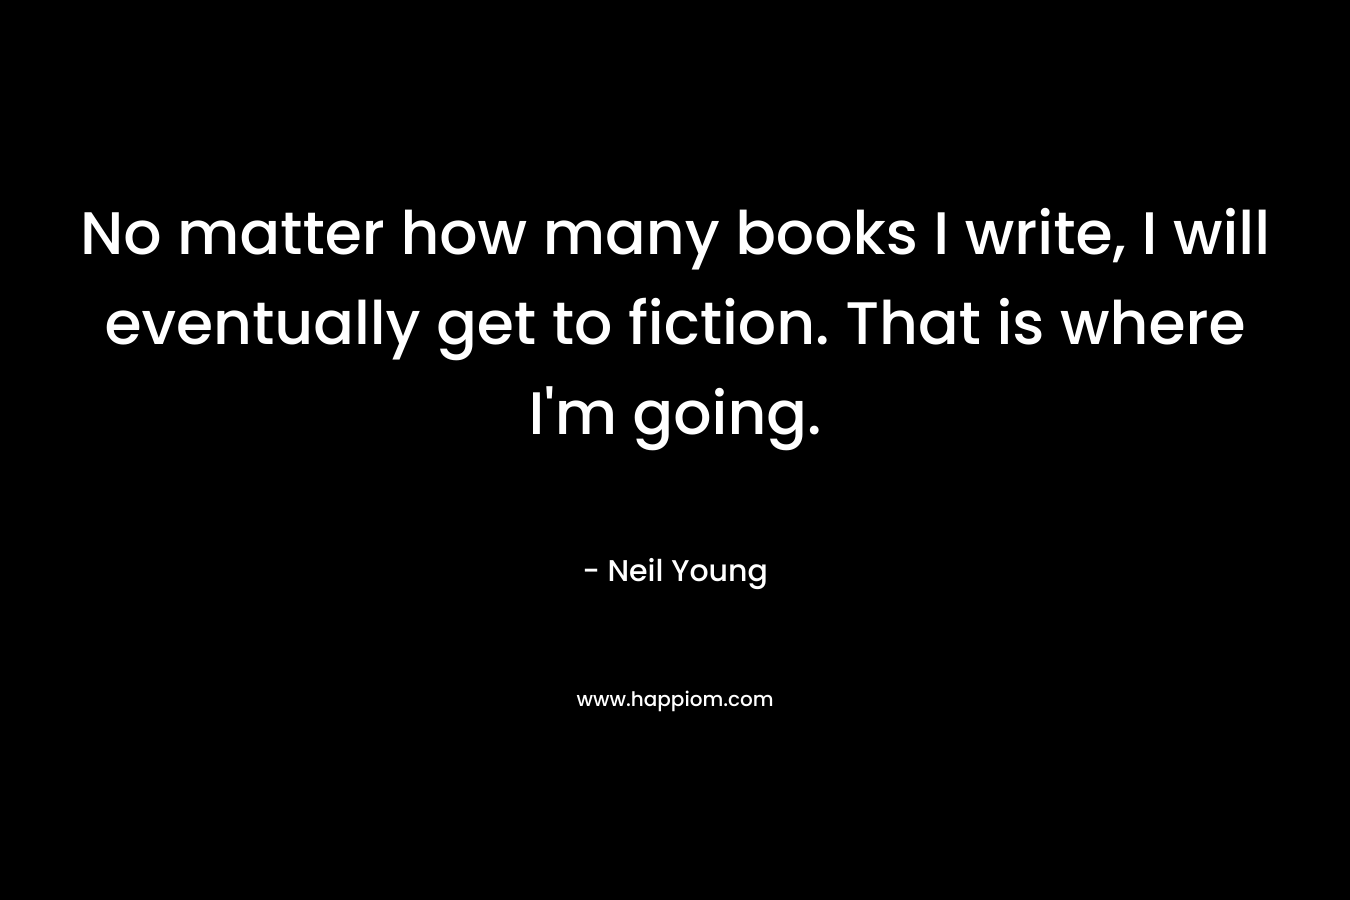 No matter how many books I write, I will eventually get to fiction. That is where I’m going. – Neil Young